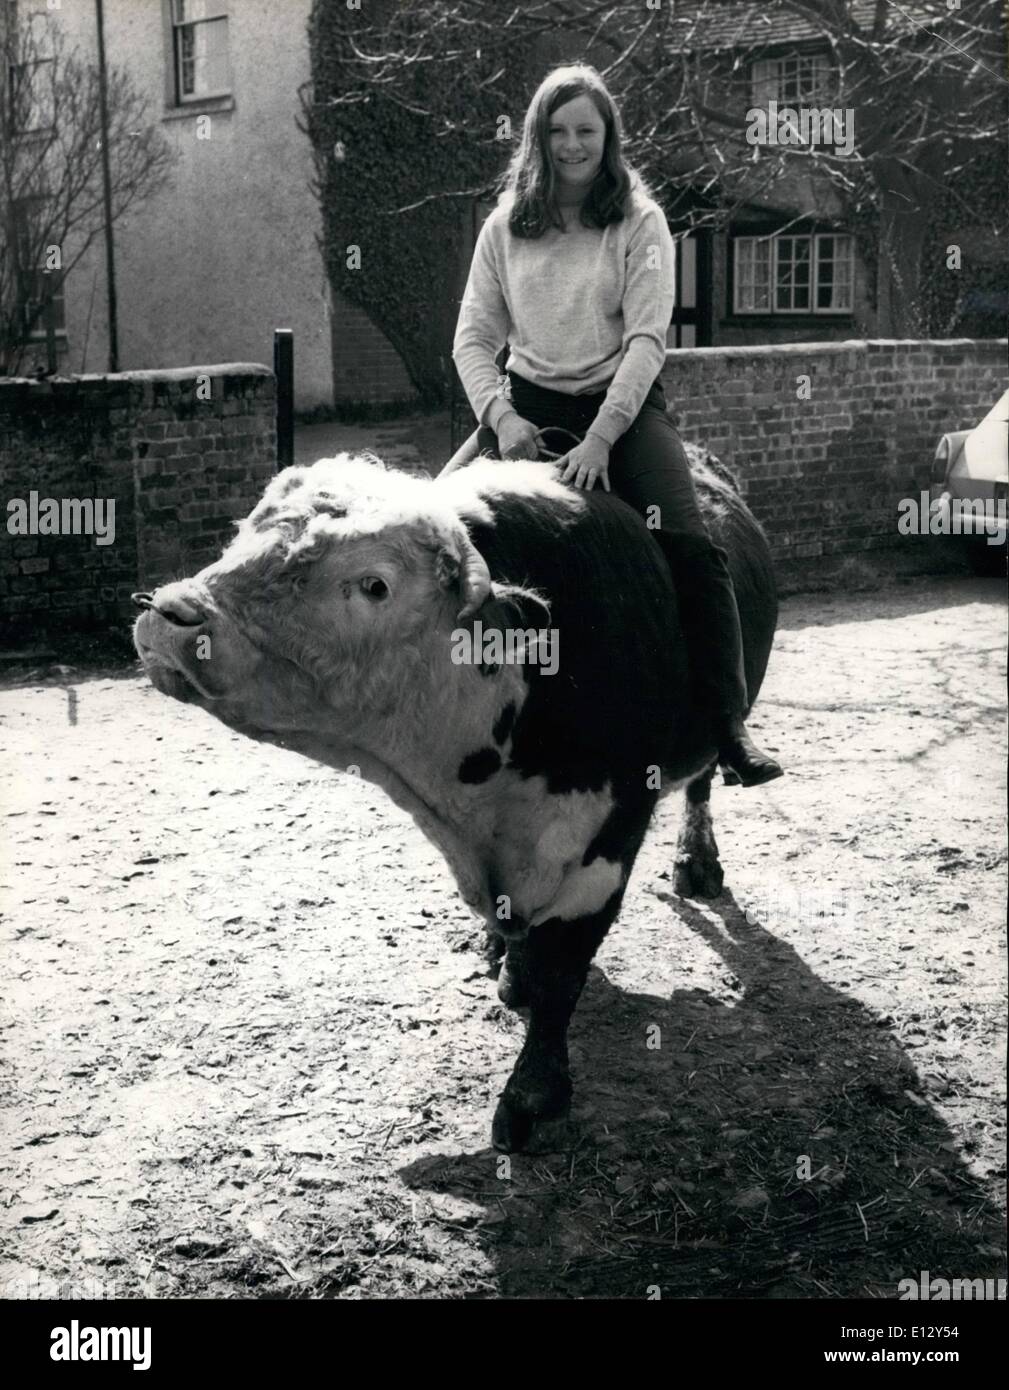 Feb. 25, 2012 - Down On The Farm - Ellen Rides Crickley The Bull: When 18 year old Ellen Bakeer wents to make a  of her father's farm in Thame, Oxfordshire she doesn't use a car or even a horse - for Ellen simply jump into the back of Crickley, the bull: Ellen, who has just won the local ''Miss Dairymaid'' title has been riding Crickley for just over 18 months - since her father bought him, in fact. For Ellen was worried about Crickley - he was so quiet - so she jumped on his back and rode him Stock Photo